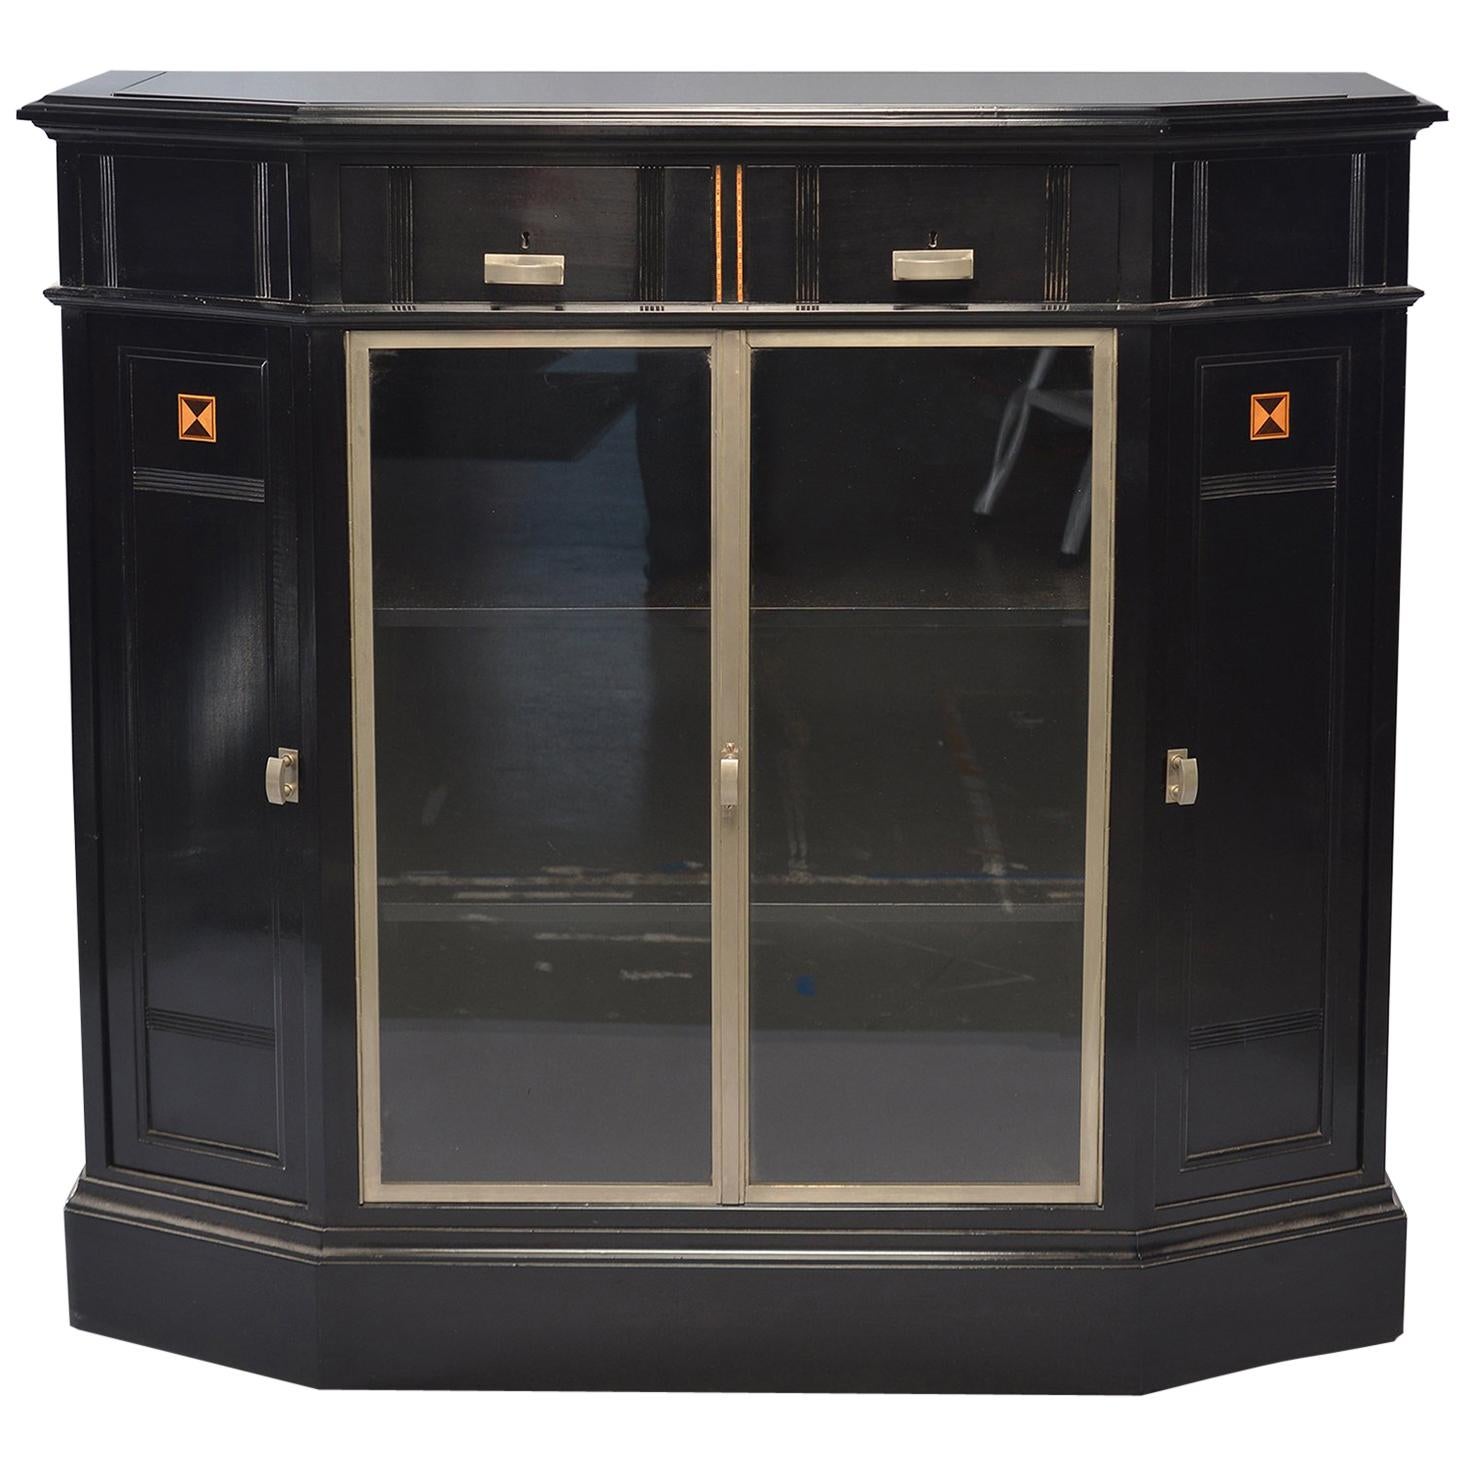 Ebonized Art Deco Cabinet with Aluminum Trim and Glass Fronted Doors